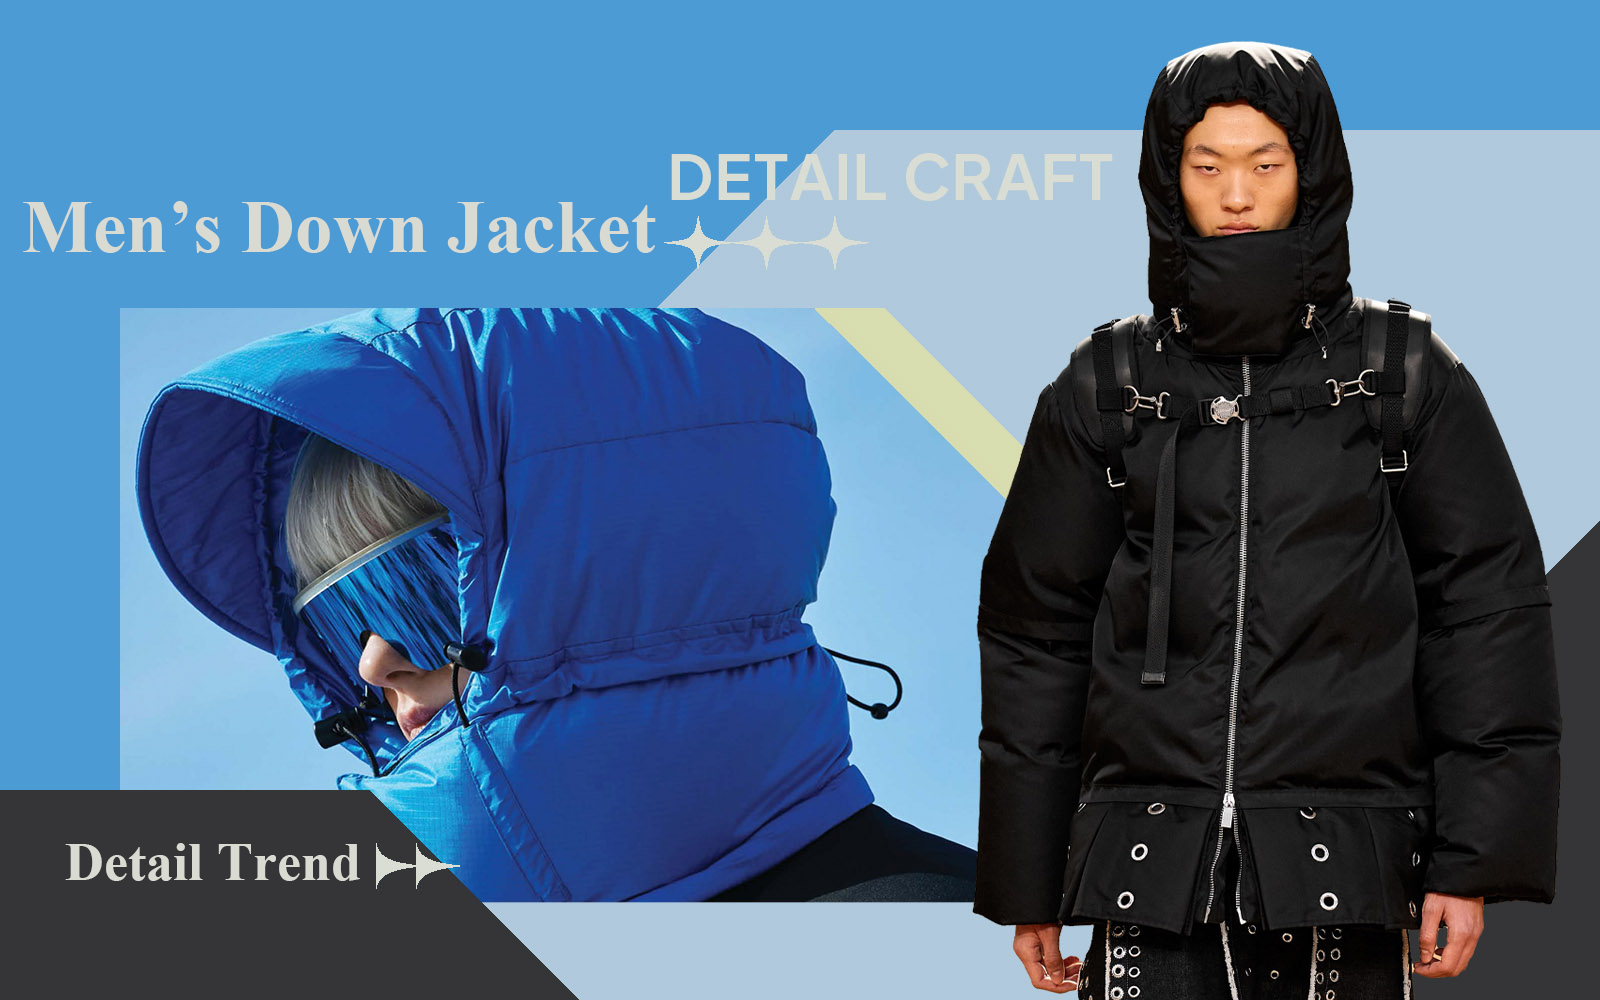 Outdoor Performance -- The Detail & Craft Trend for Men's Down Jacket